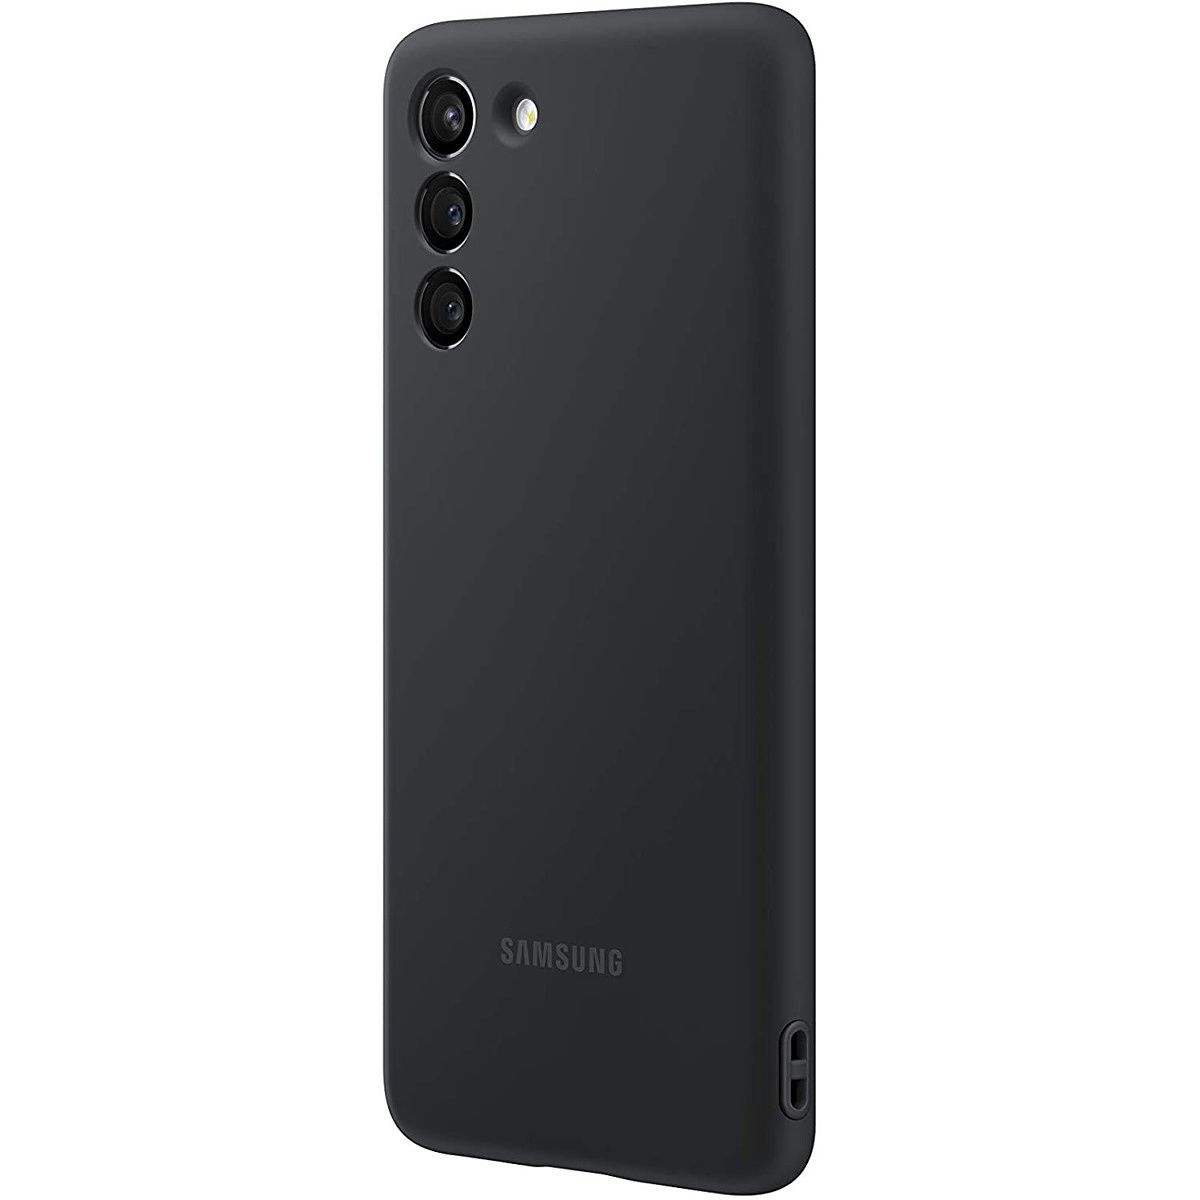 This is Samsung's official silicone case for the Galaxy S21. The case is $23.60 at Amazon, but if it sells out (or you just don't like Amazon), Best Buy has the black color for $25.